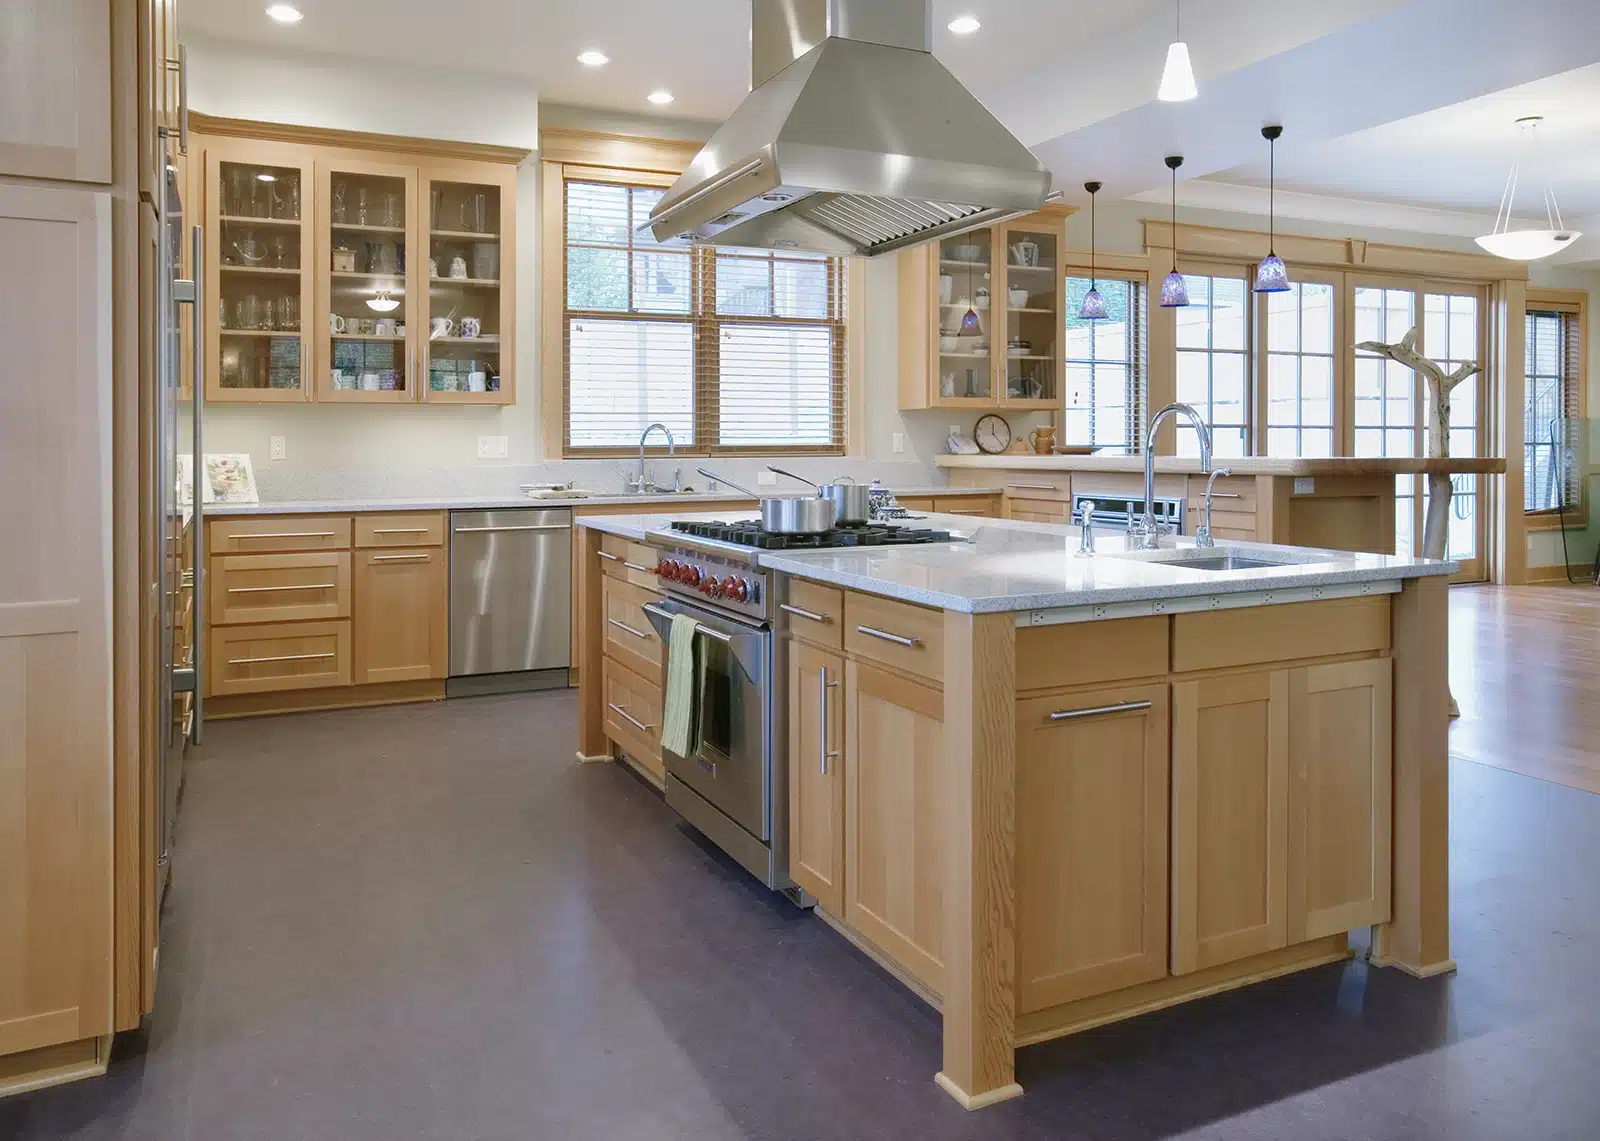 A well-appointed kitchen featuring generous clearances around a central island, natural wood cabinetry, and modern appliances, designed for optimal flow and functionality.